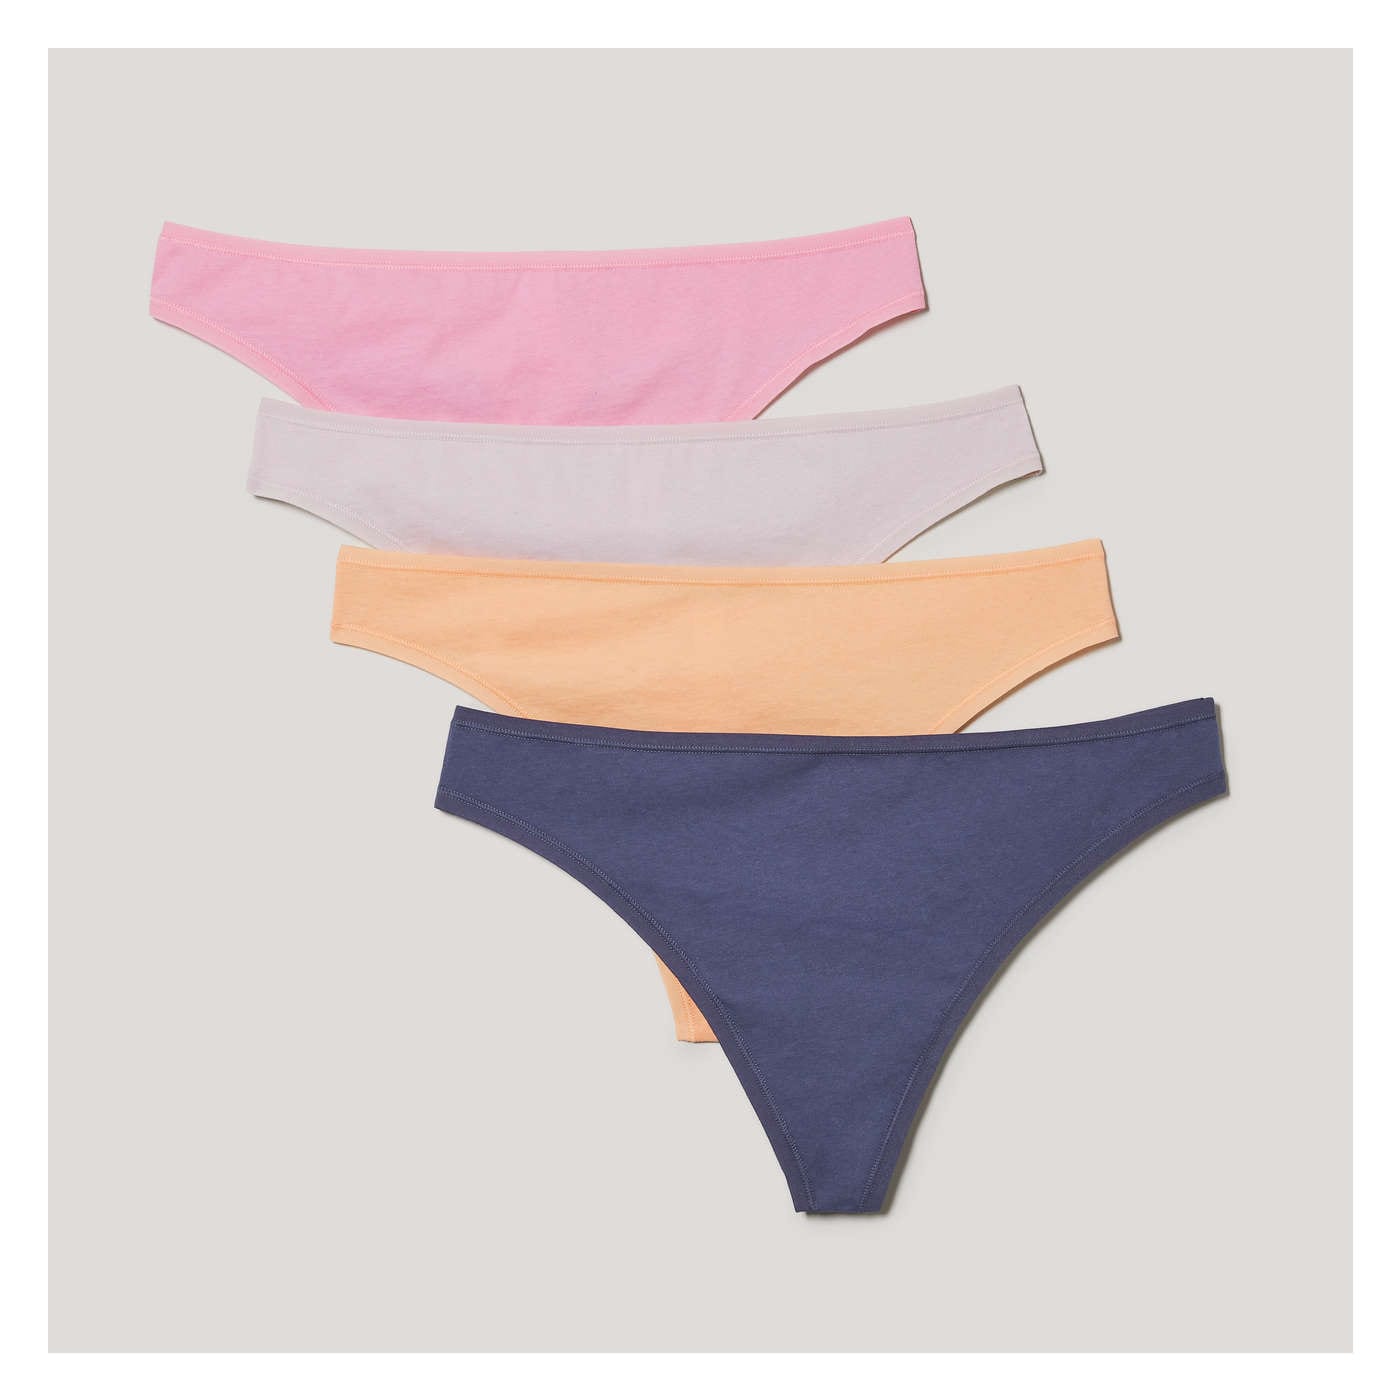 to-Go Panty Kit Includes 4 Items Seamless Thong Underwear Fresh